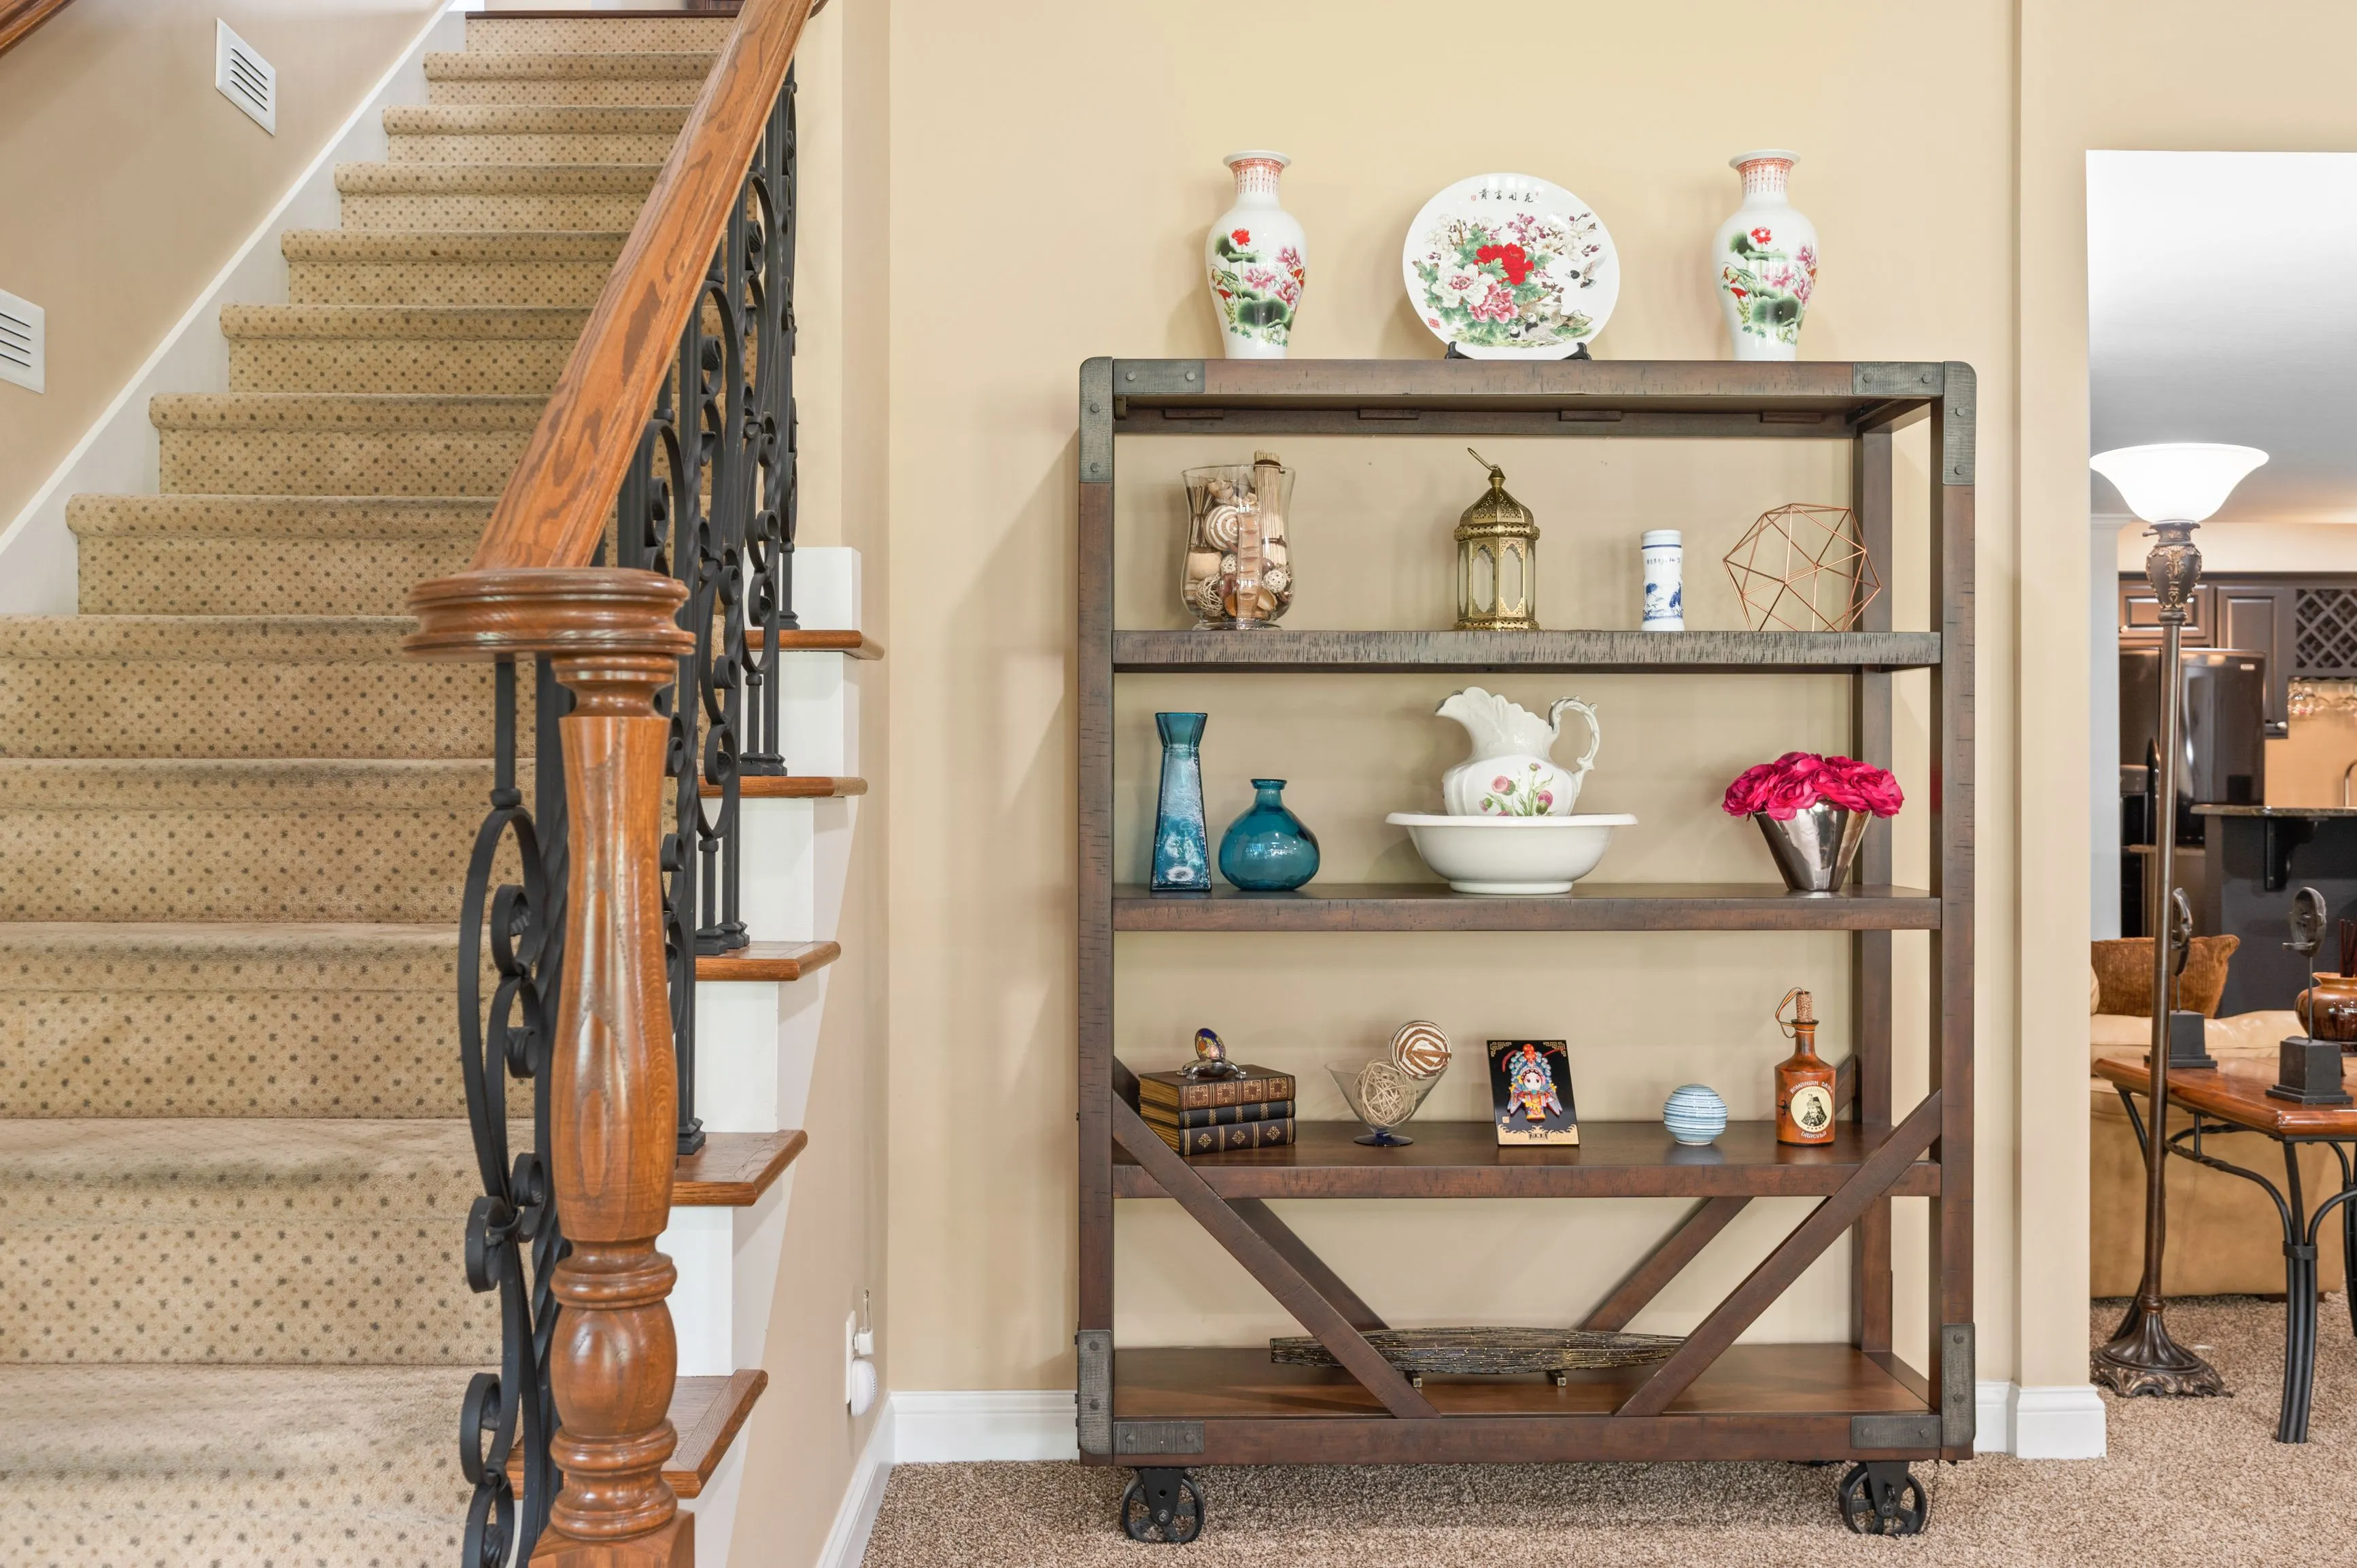 Elegant home interior featuring a wooden staircase with ornate iron balusters and a wooden shelf cart displaying various decorative items such as vases, plates, and figurines.